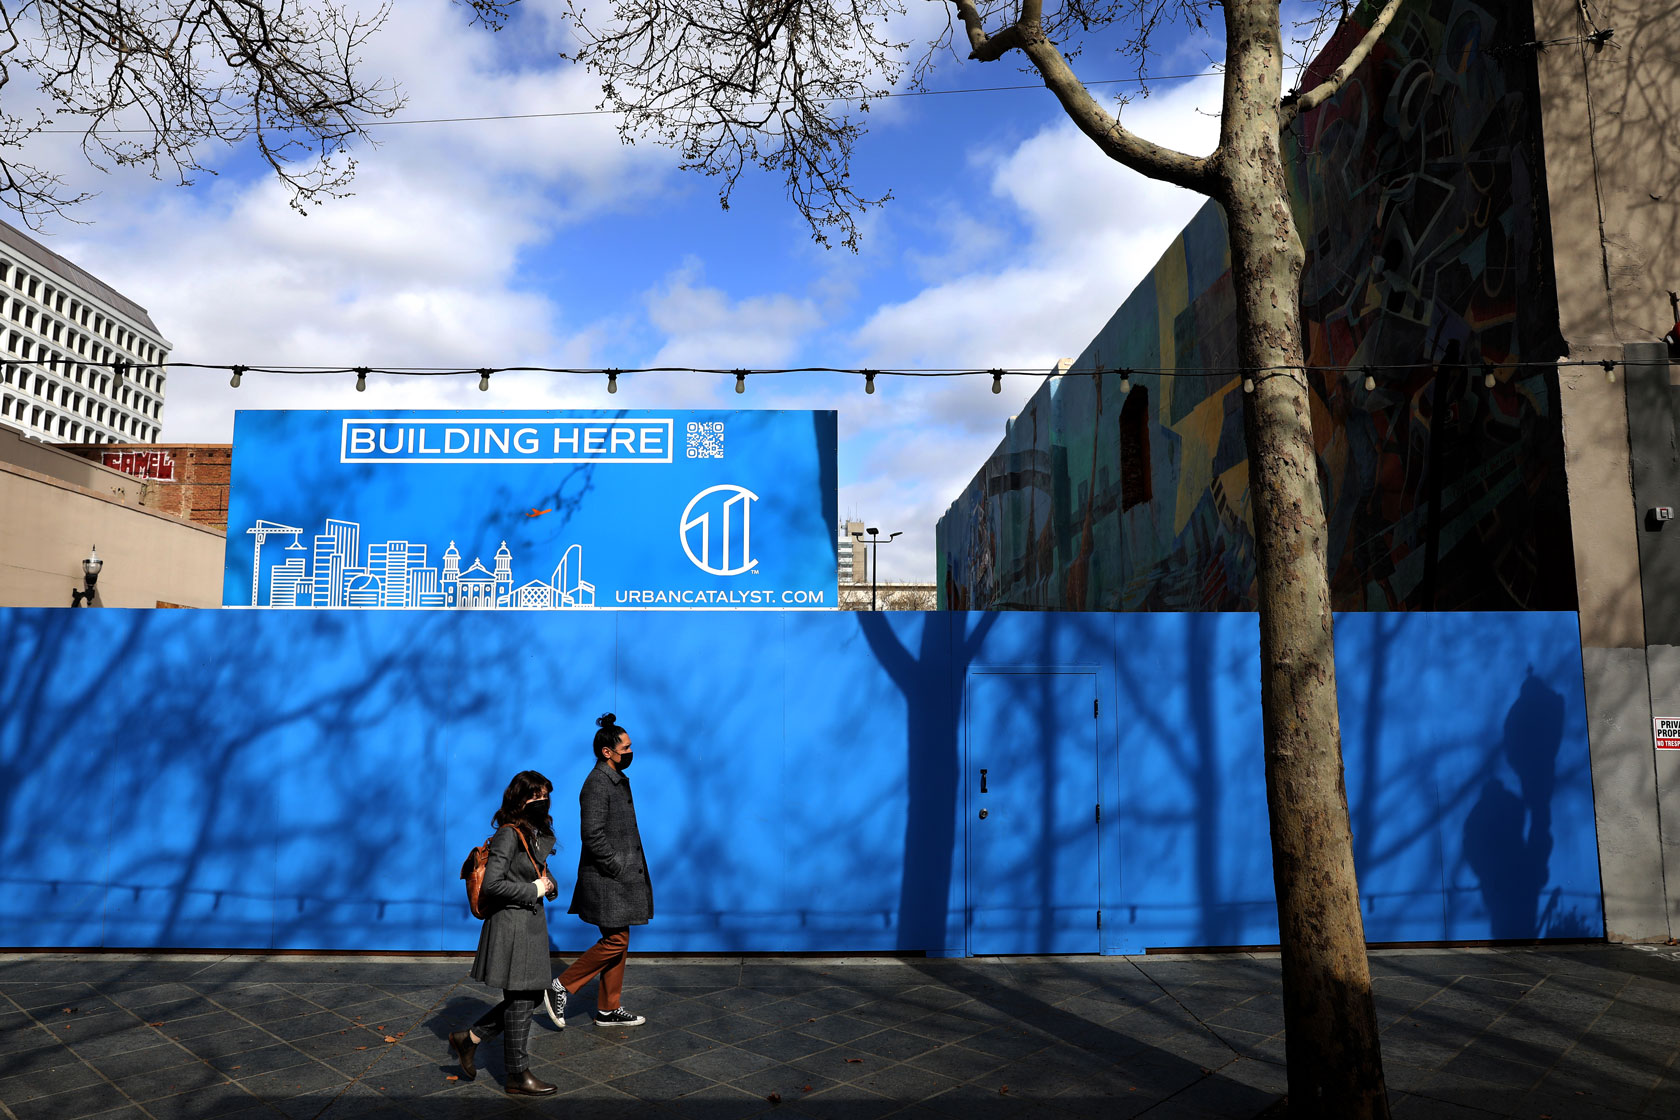 Two people walk past a future site for a new building in San Jose, California.